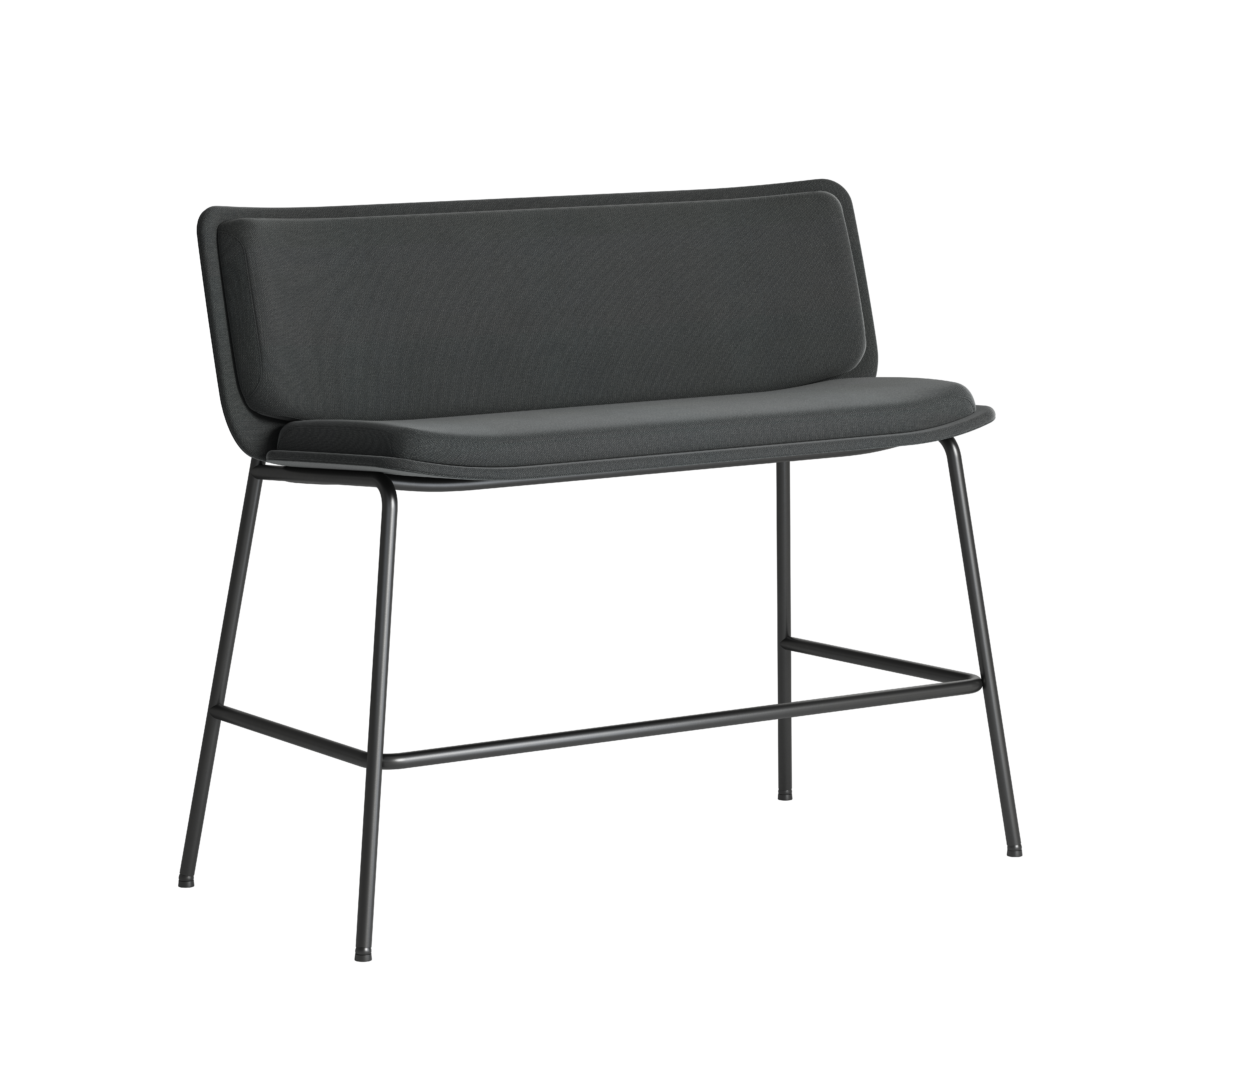 OCEE&FOUR – Stools & Benches – FourAll Bench Fully Upholstered – Packshot Image 1